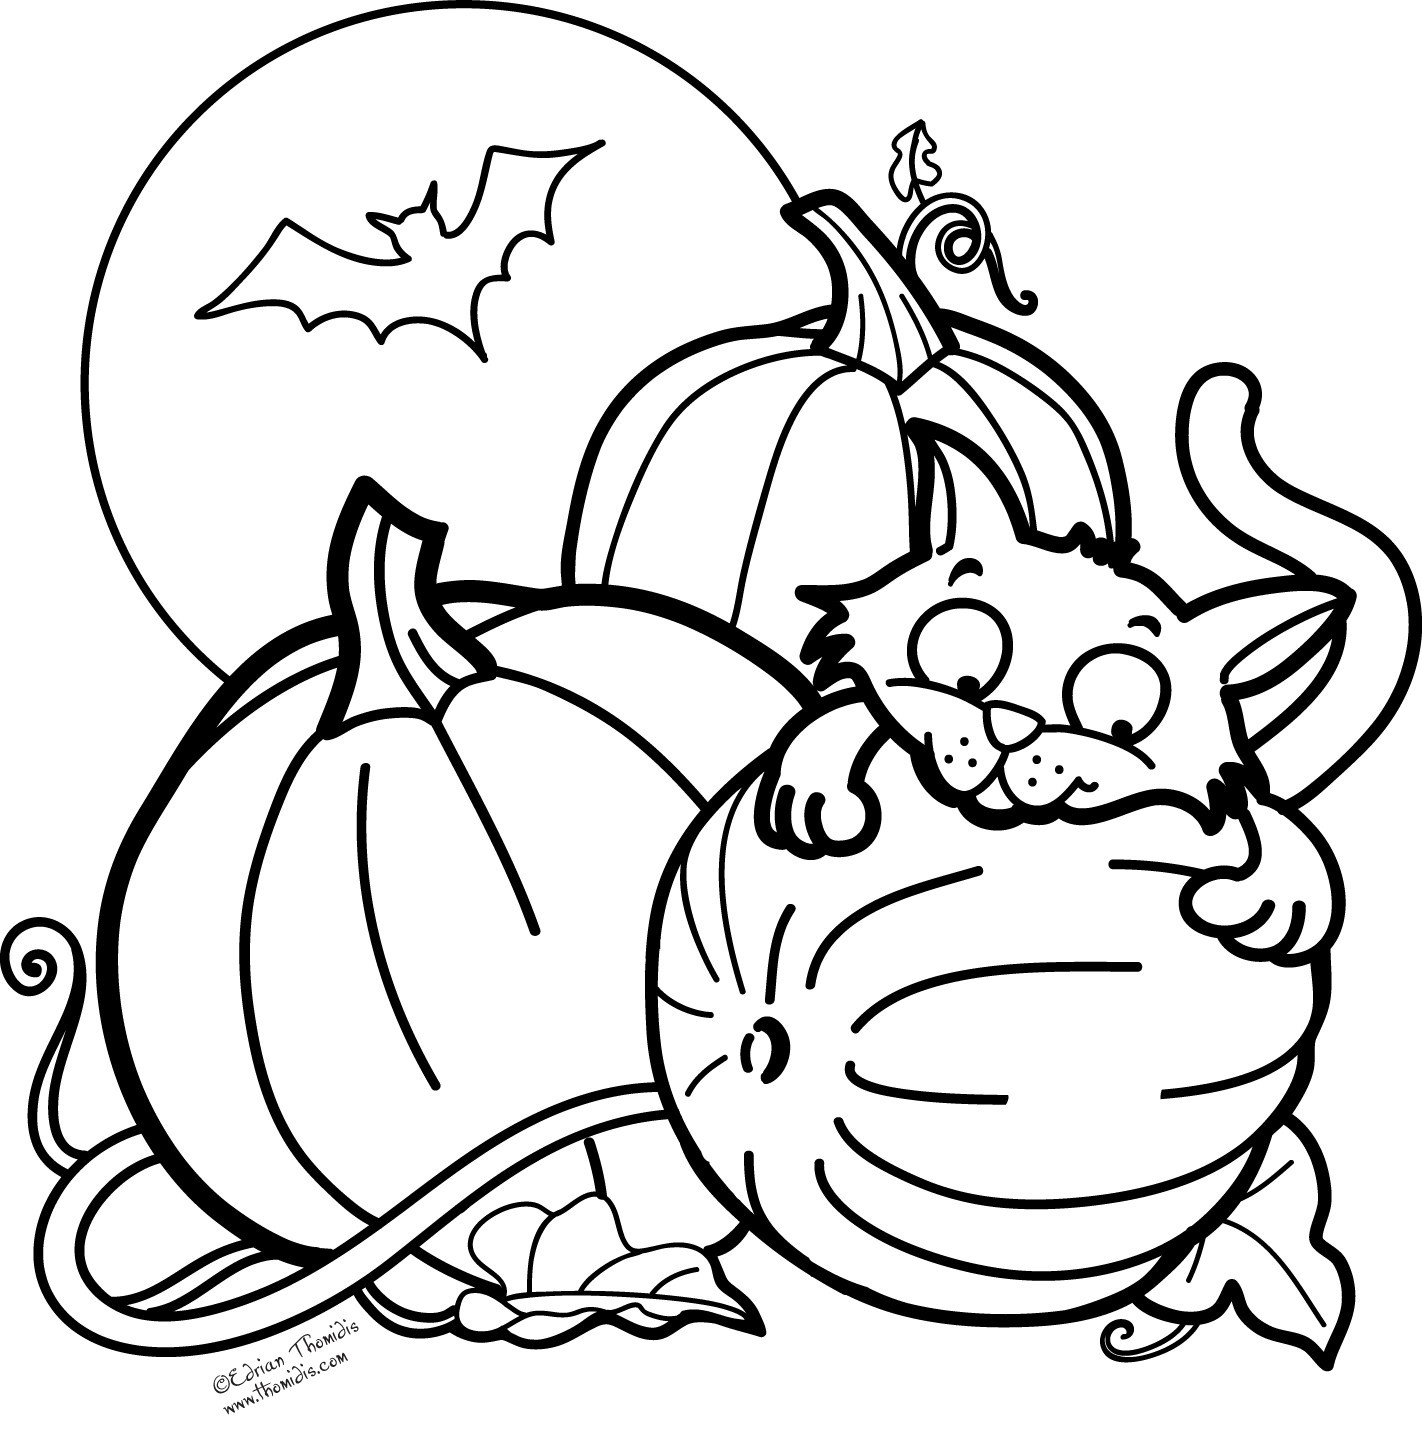 Halloween Coloring Book
 Halloween Coloring Pages coloringsuite